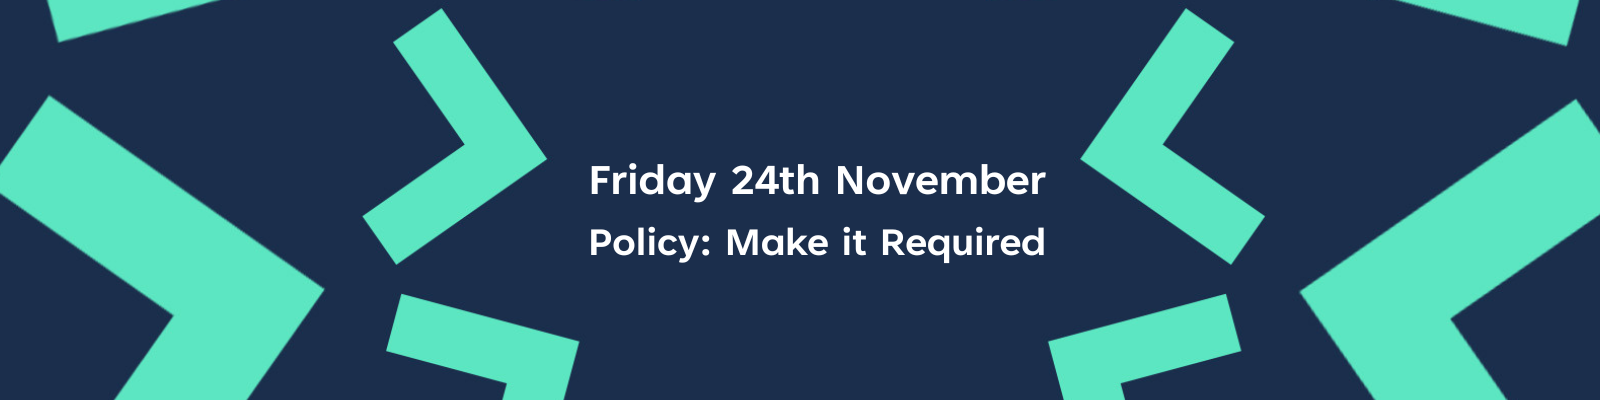 Friday 24th November: Policy: Make it Required